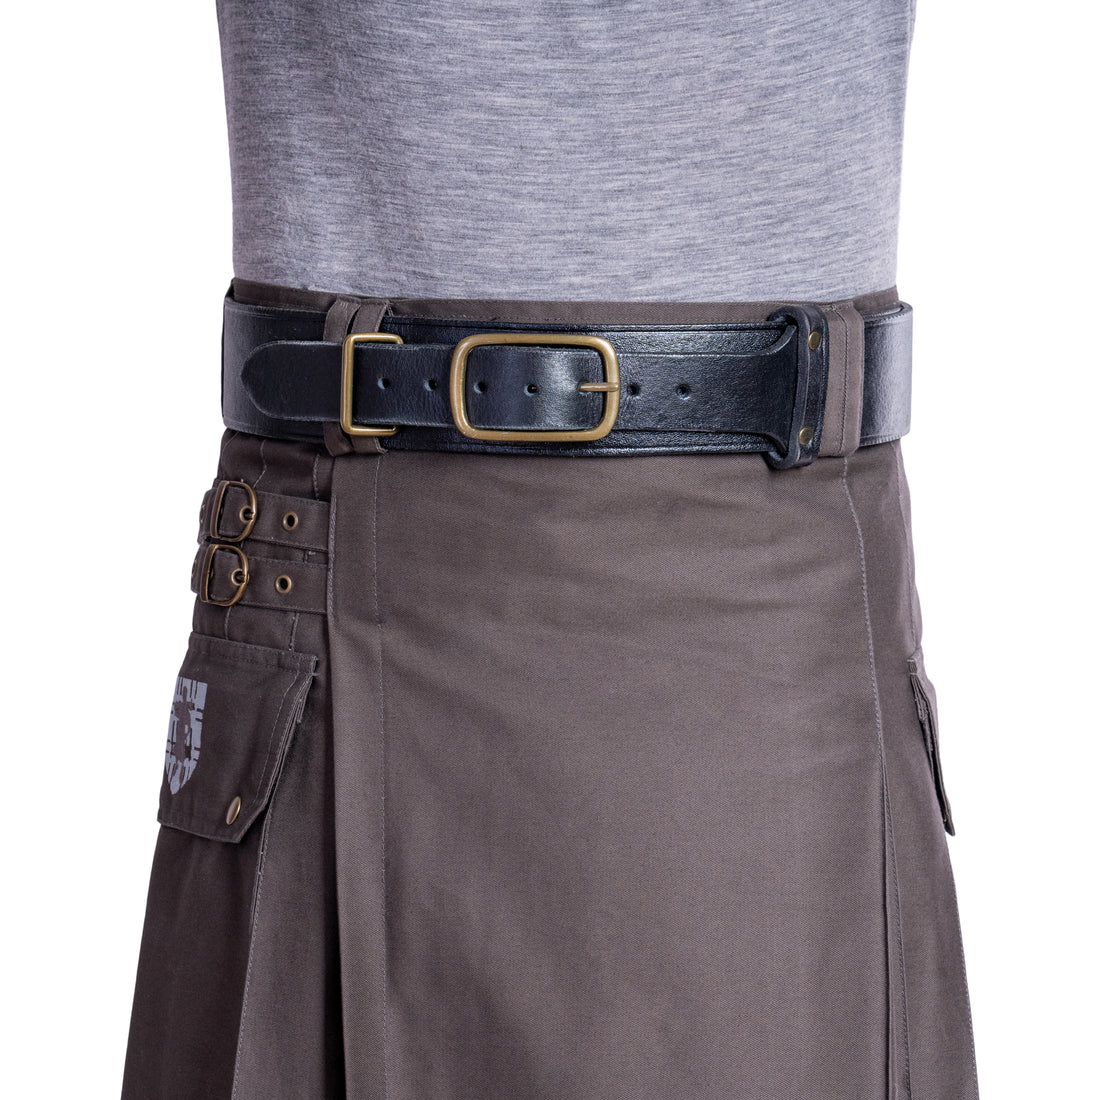 Dundee Kilt Belt - Black Leather Classic Preview #2